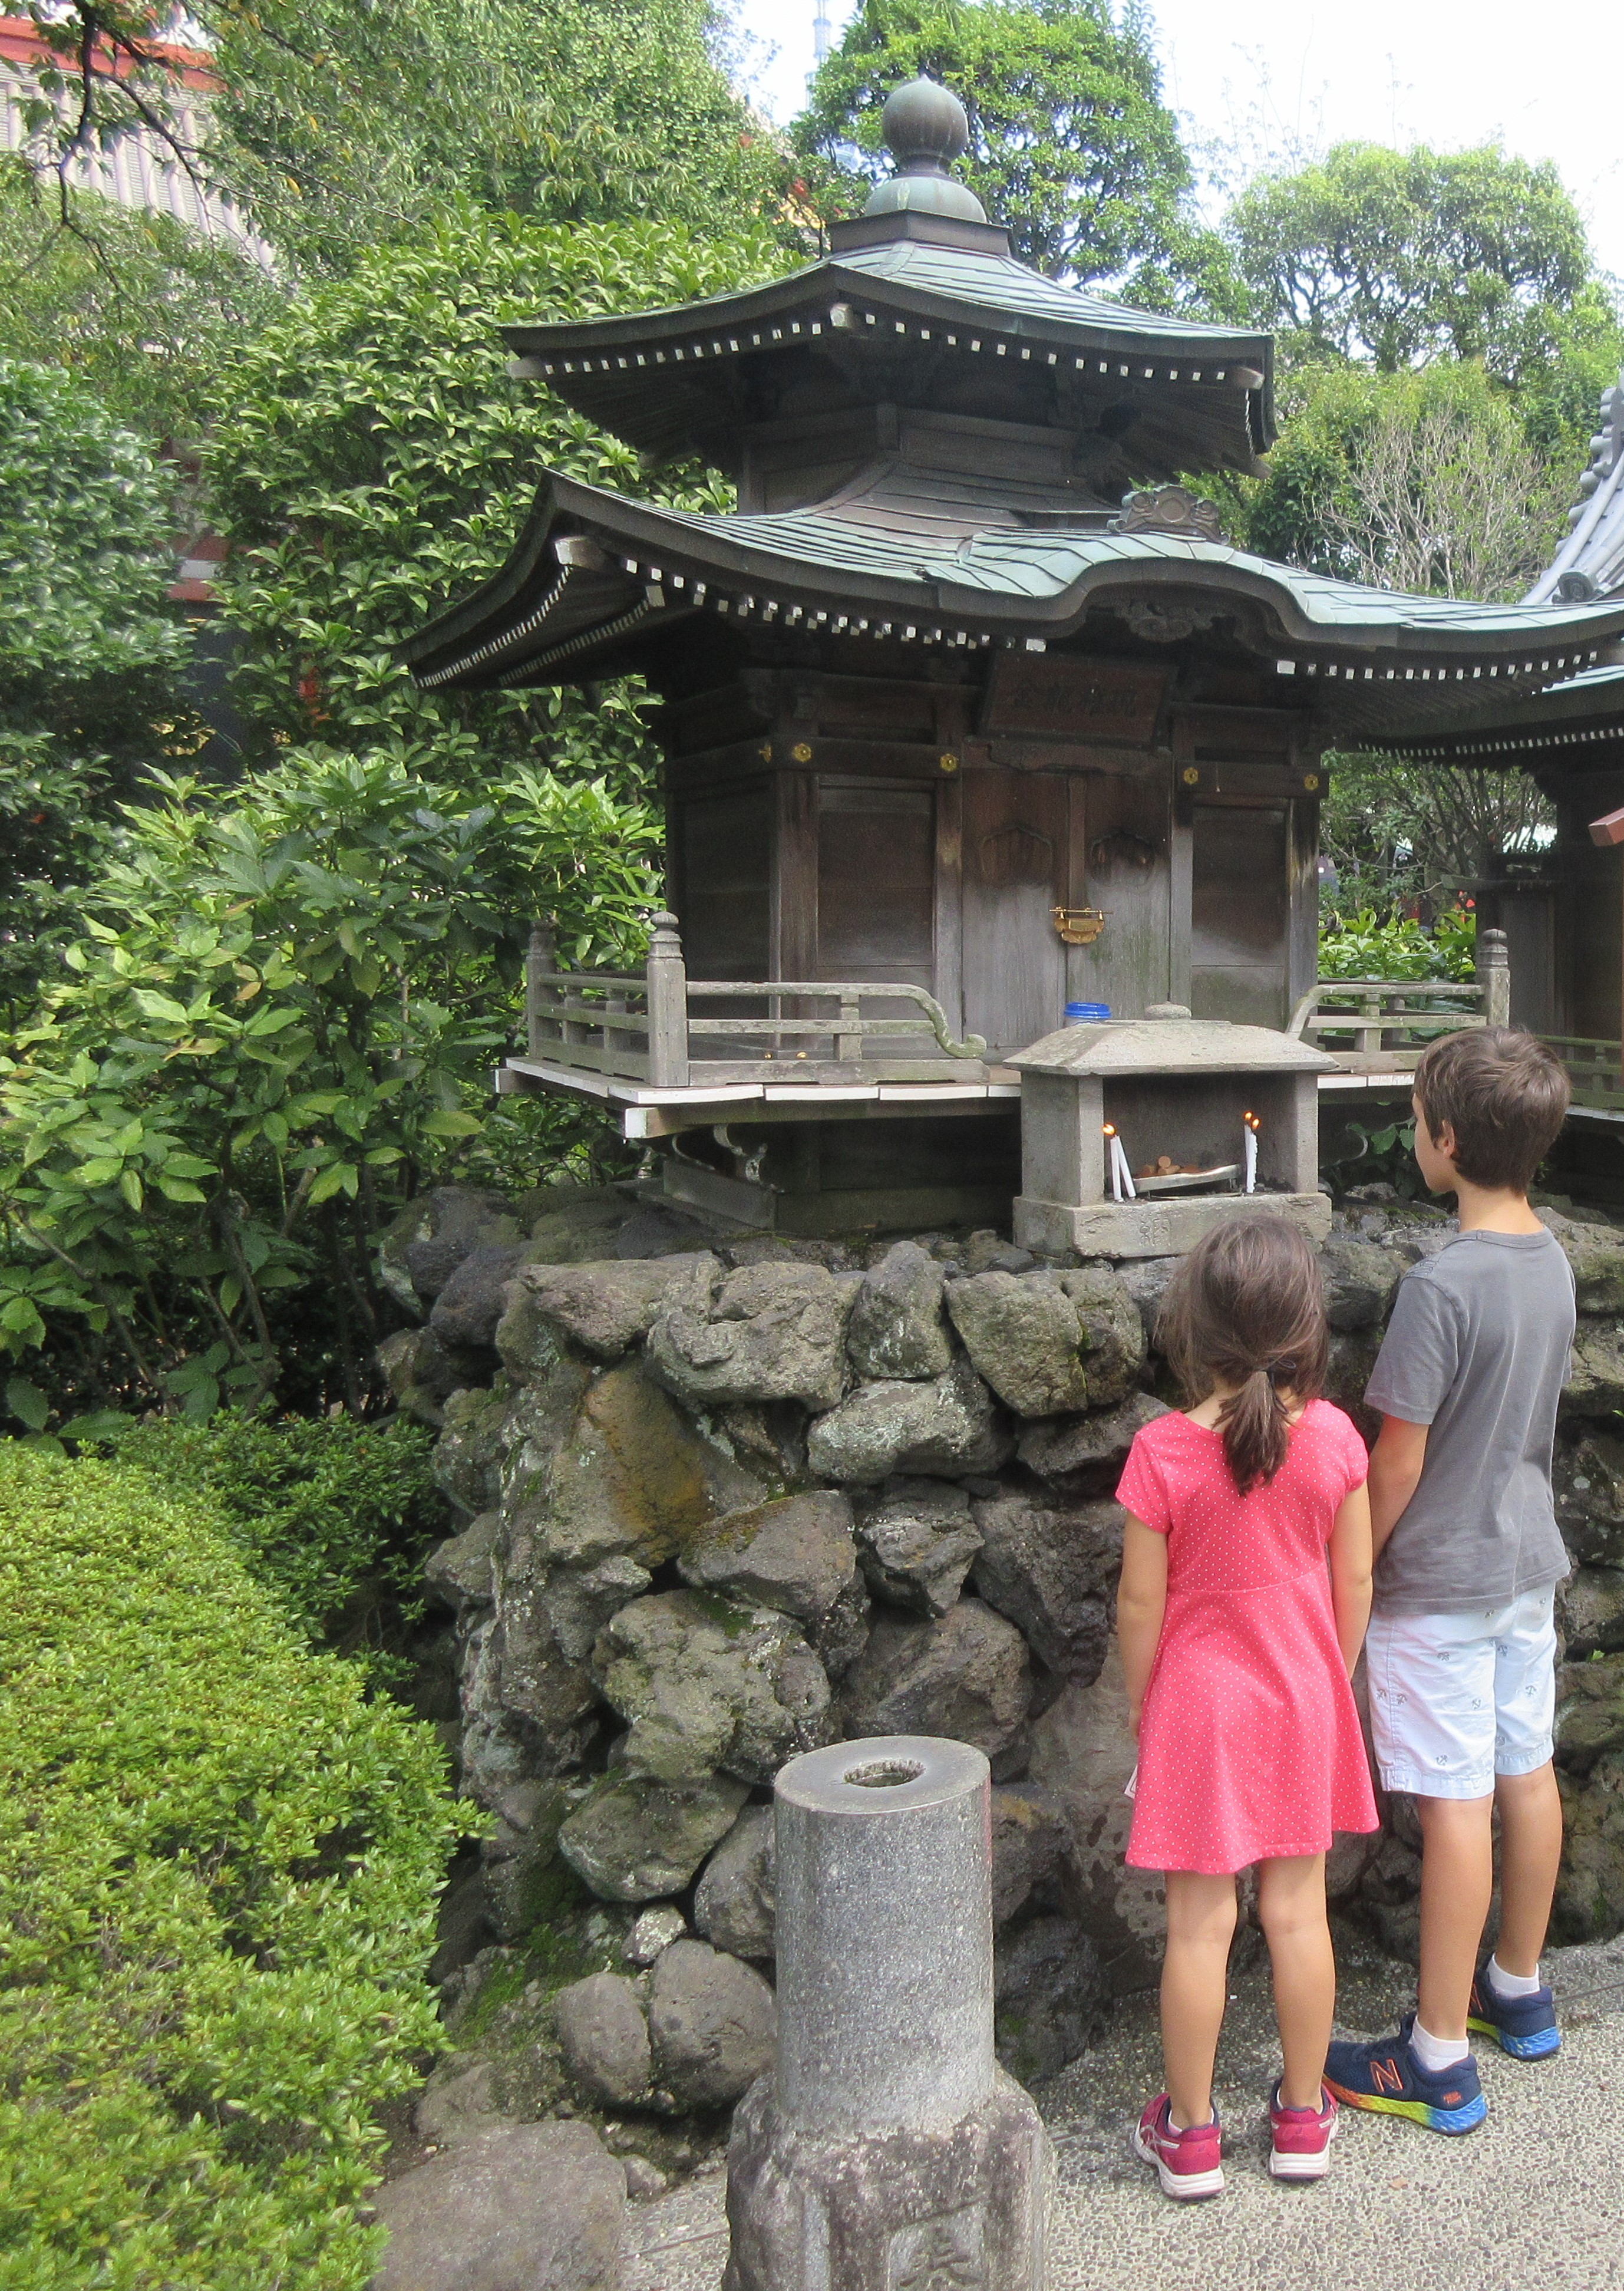 Two kids in front of a small religious monument.